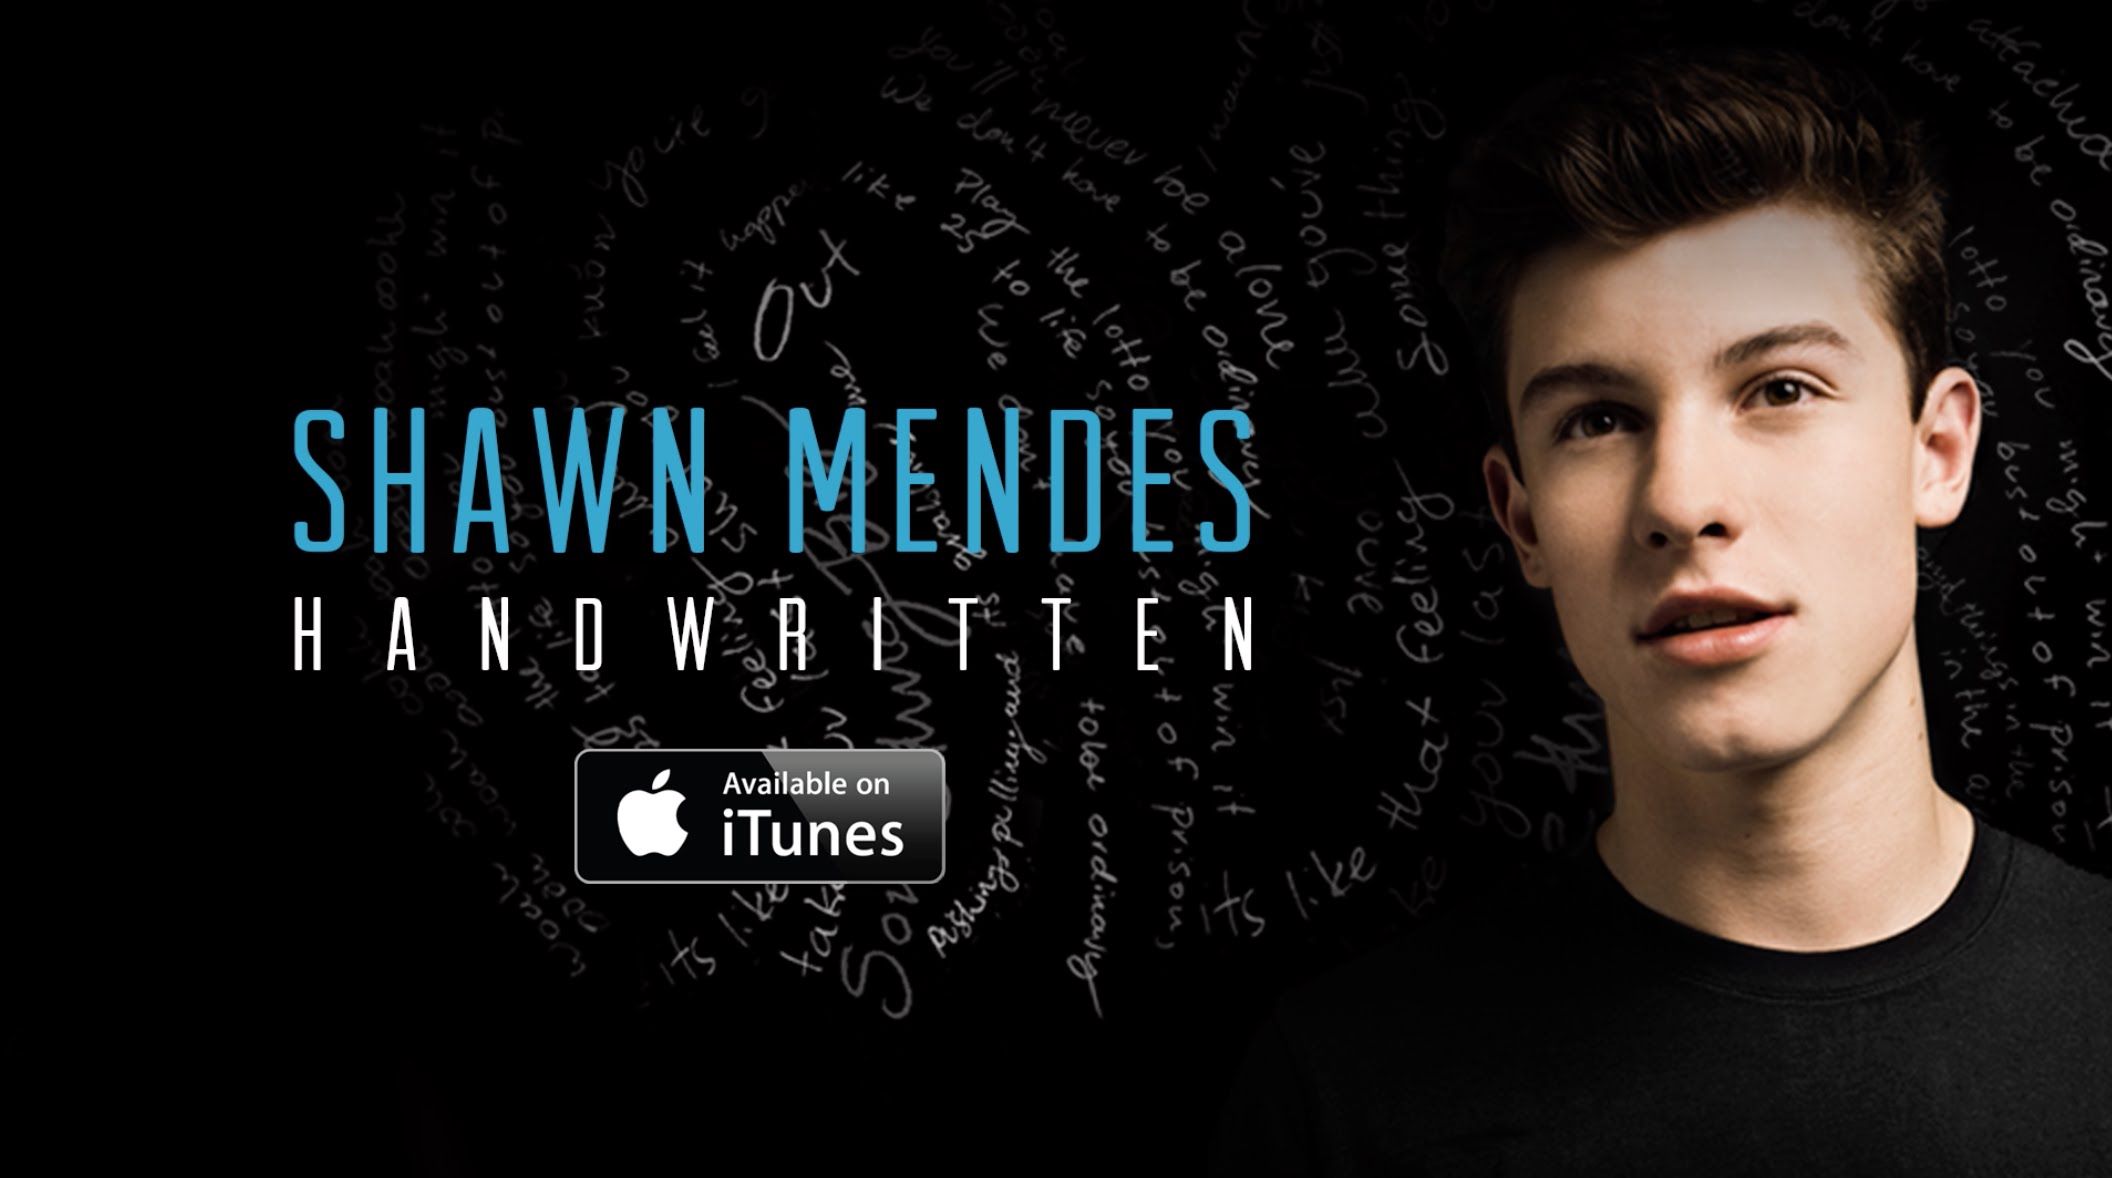 Shawn Mendes – “Handwritten” Album Available Now!